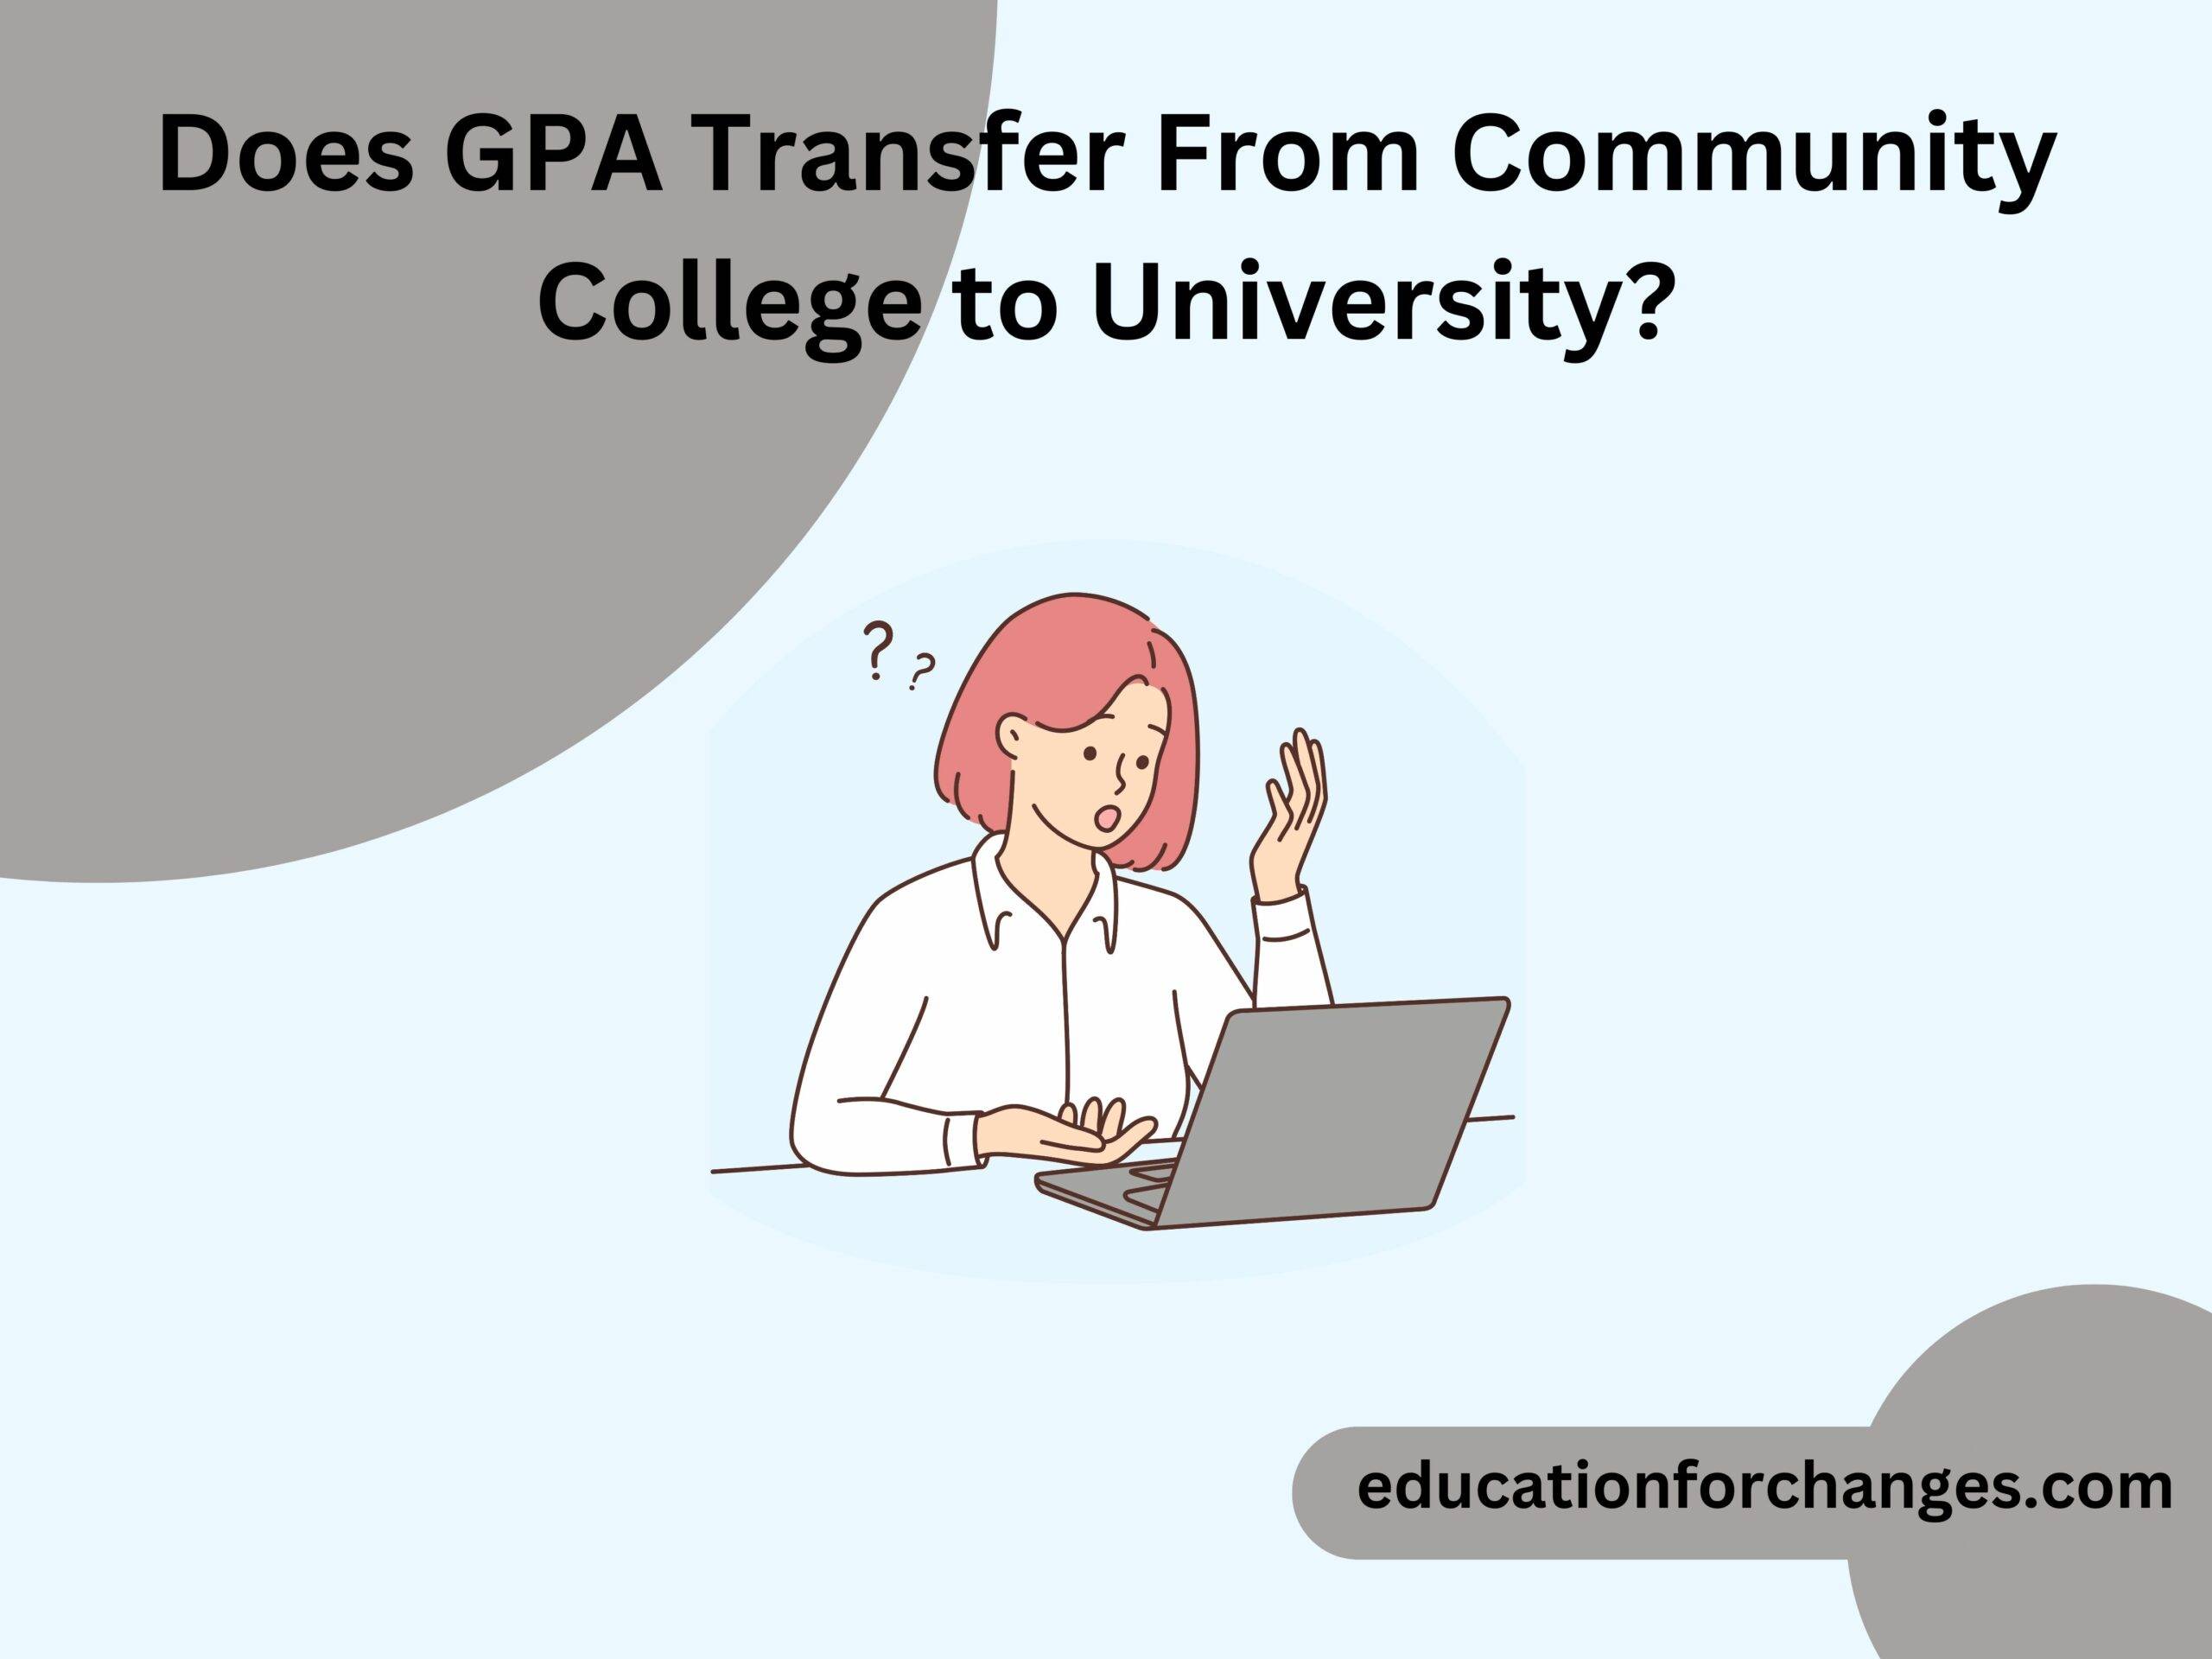 Does GPA Transfer From Community College to University?